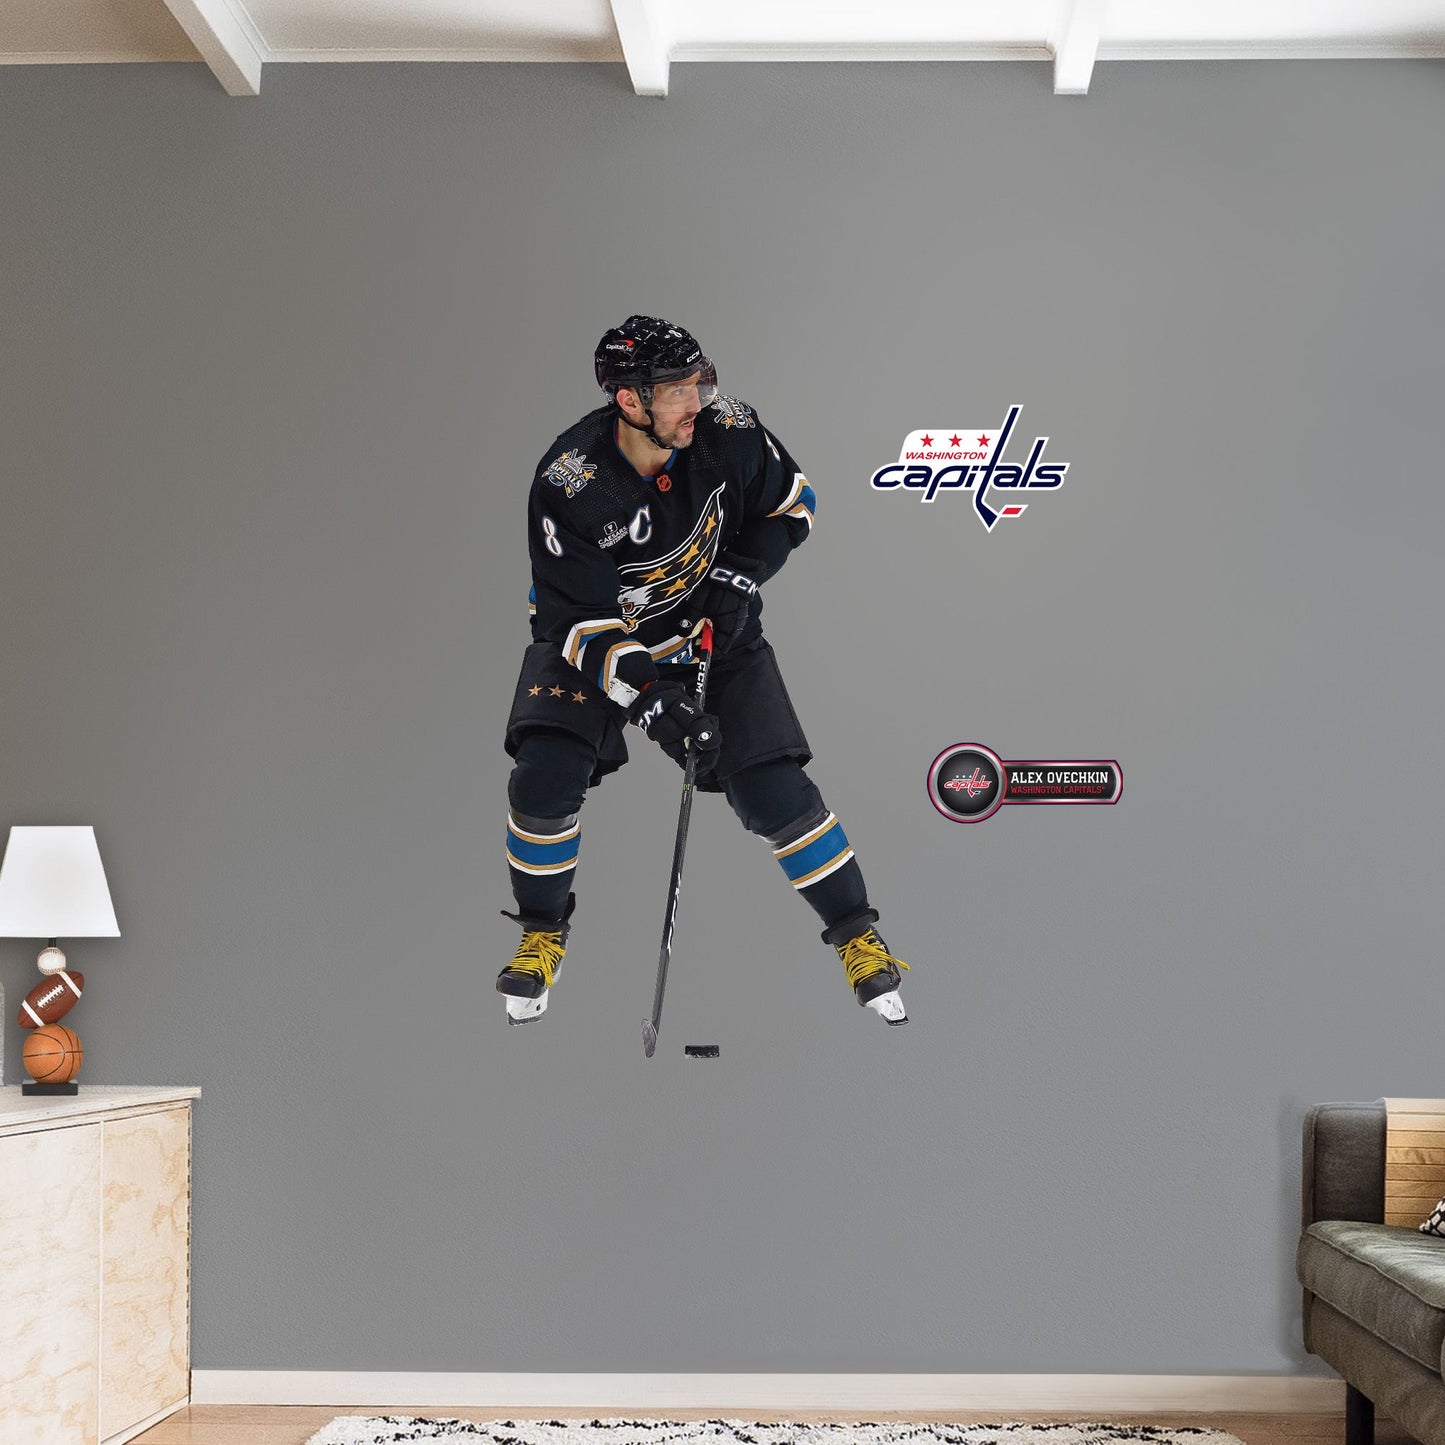 Washington Capitals: Alex Ovechkin - Officially Licensed NHL Removable Adhesive Decal